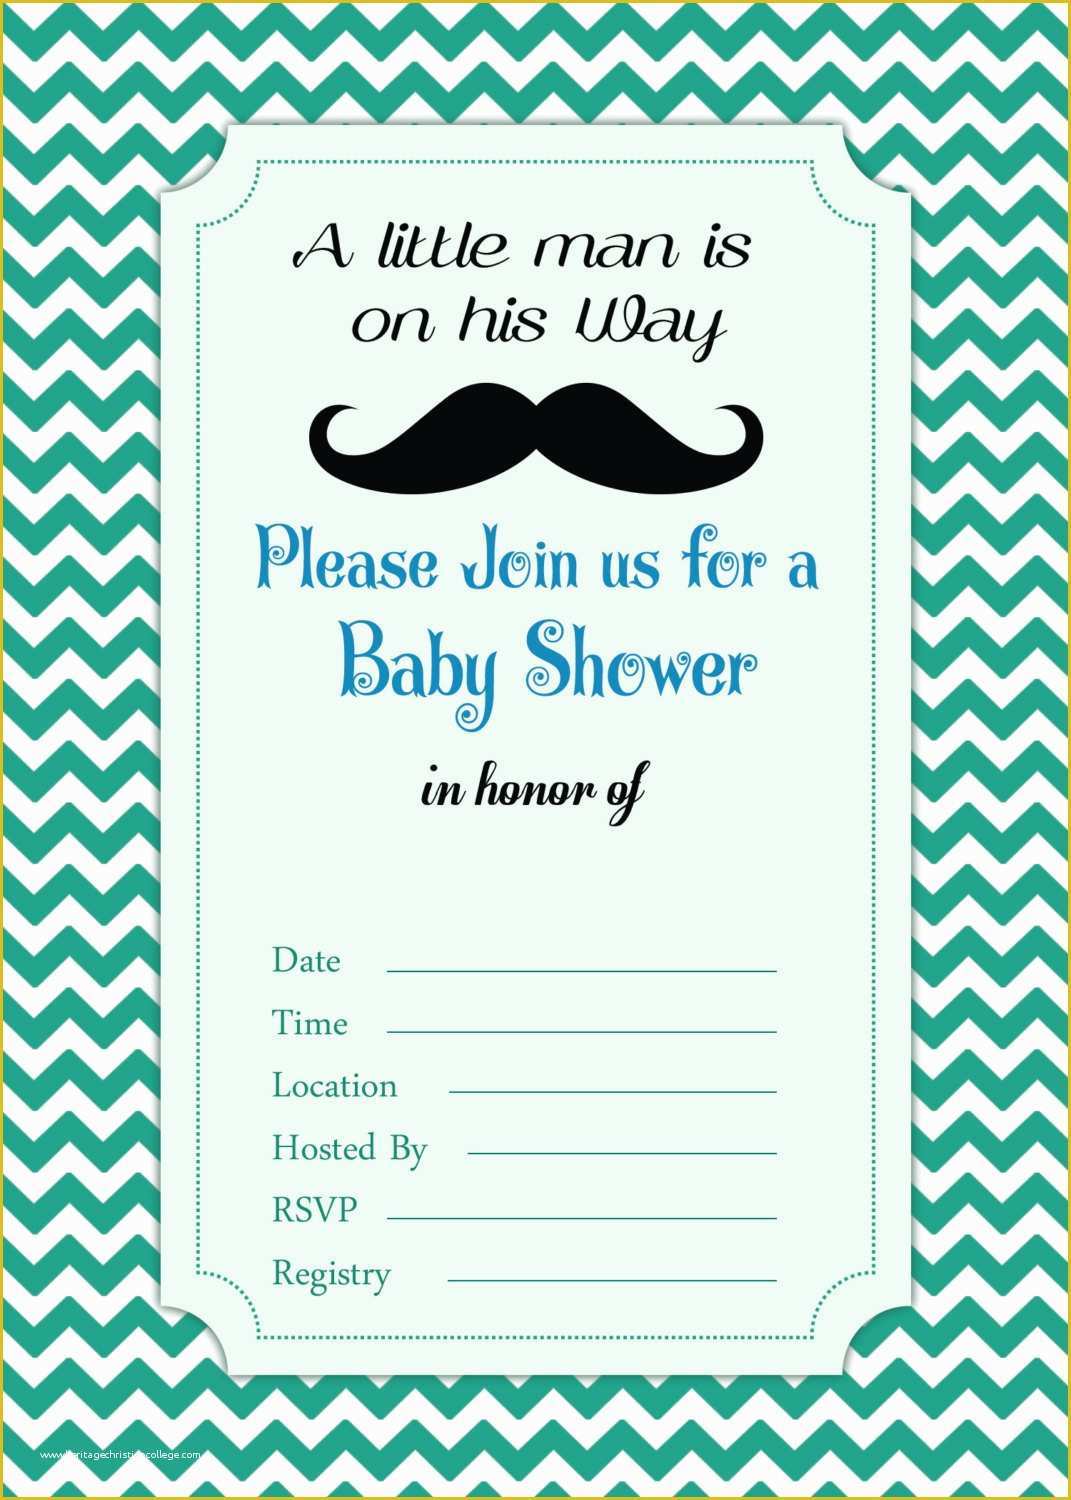 Little Man Birthday Invitation Template Free Of Mustache Baby Boy Shower Invitation Instant Download Fill In